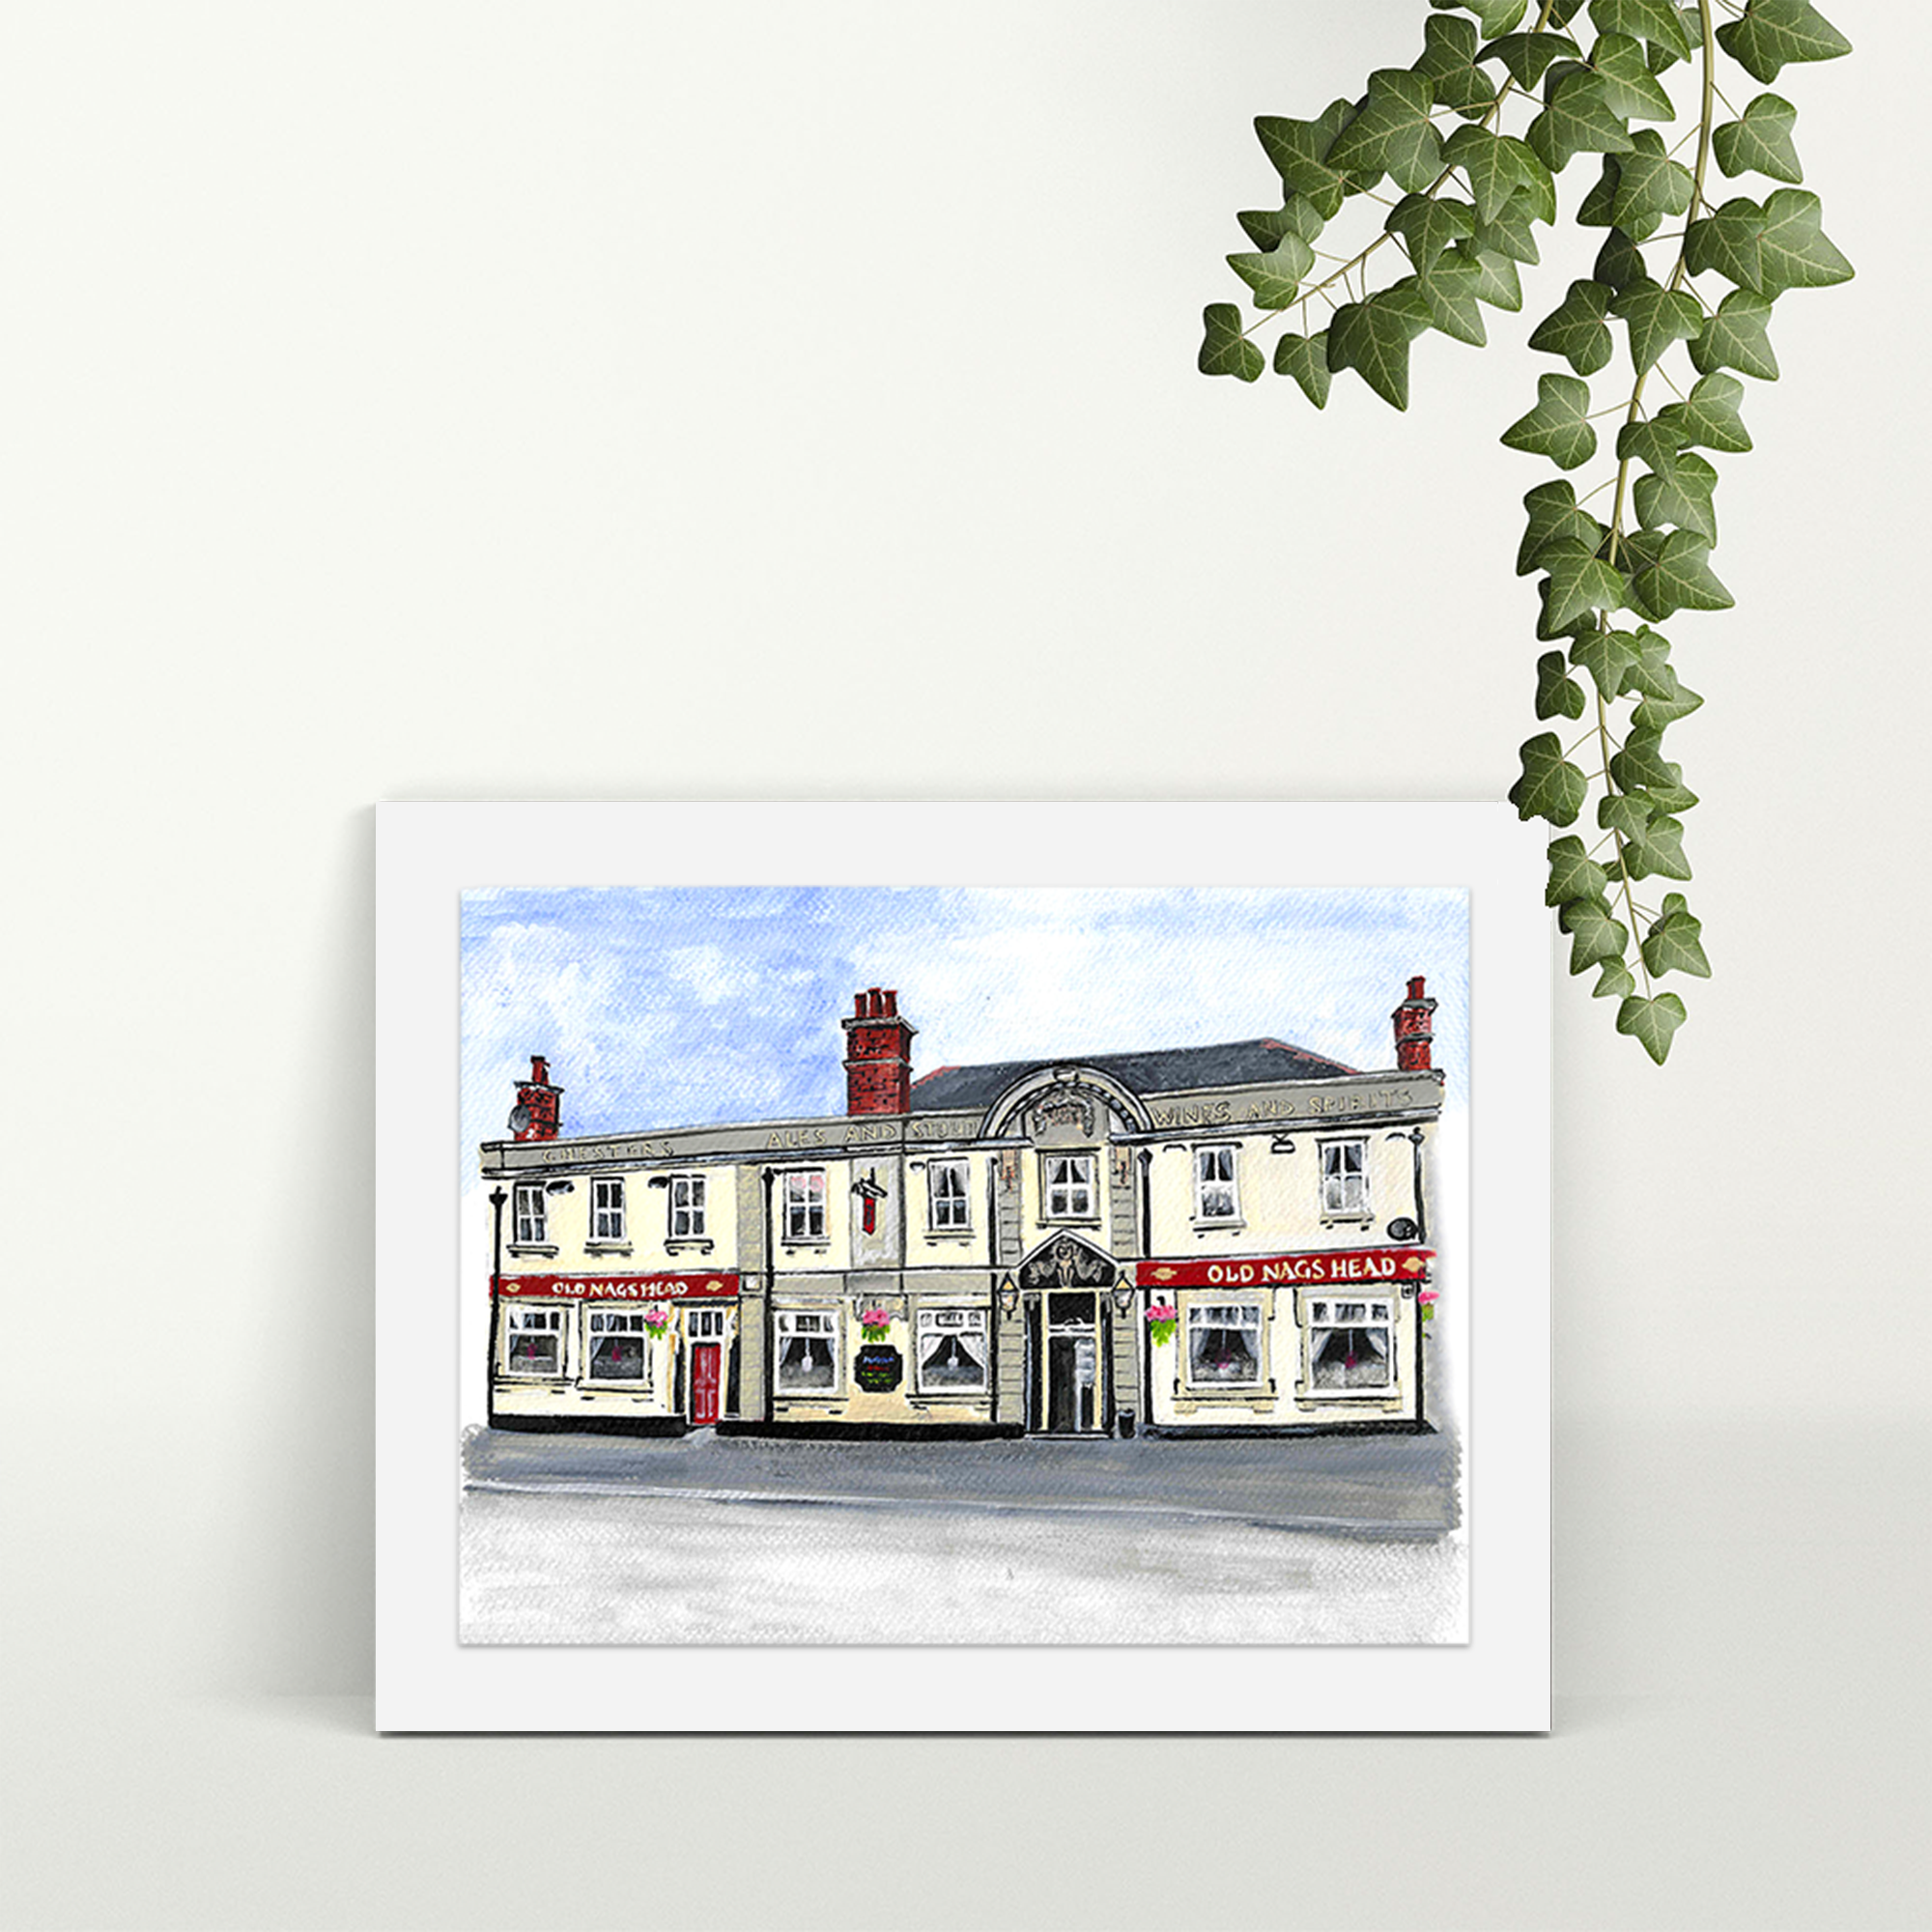 Old Nags Head Irlam - A4 Print - Mounted